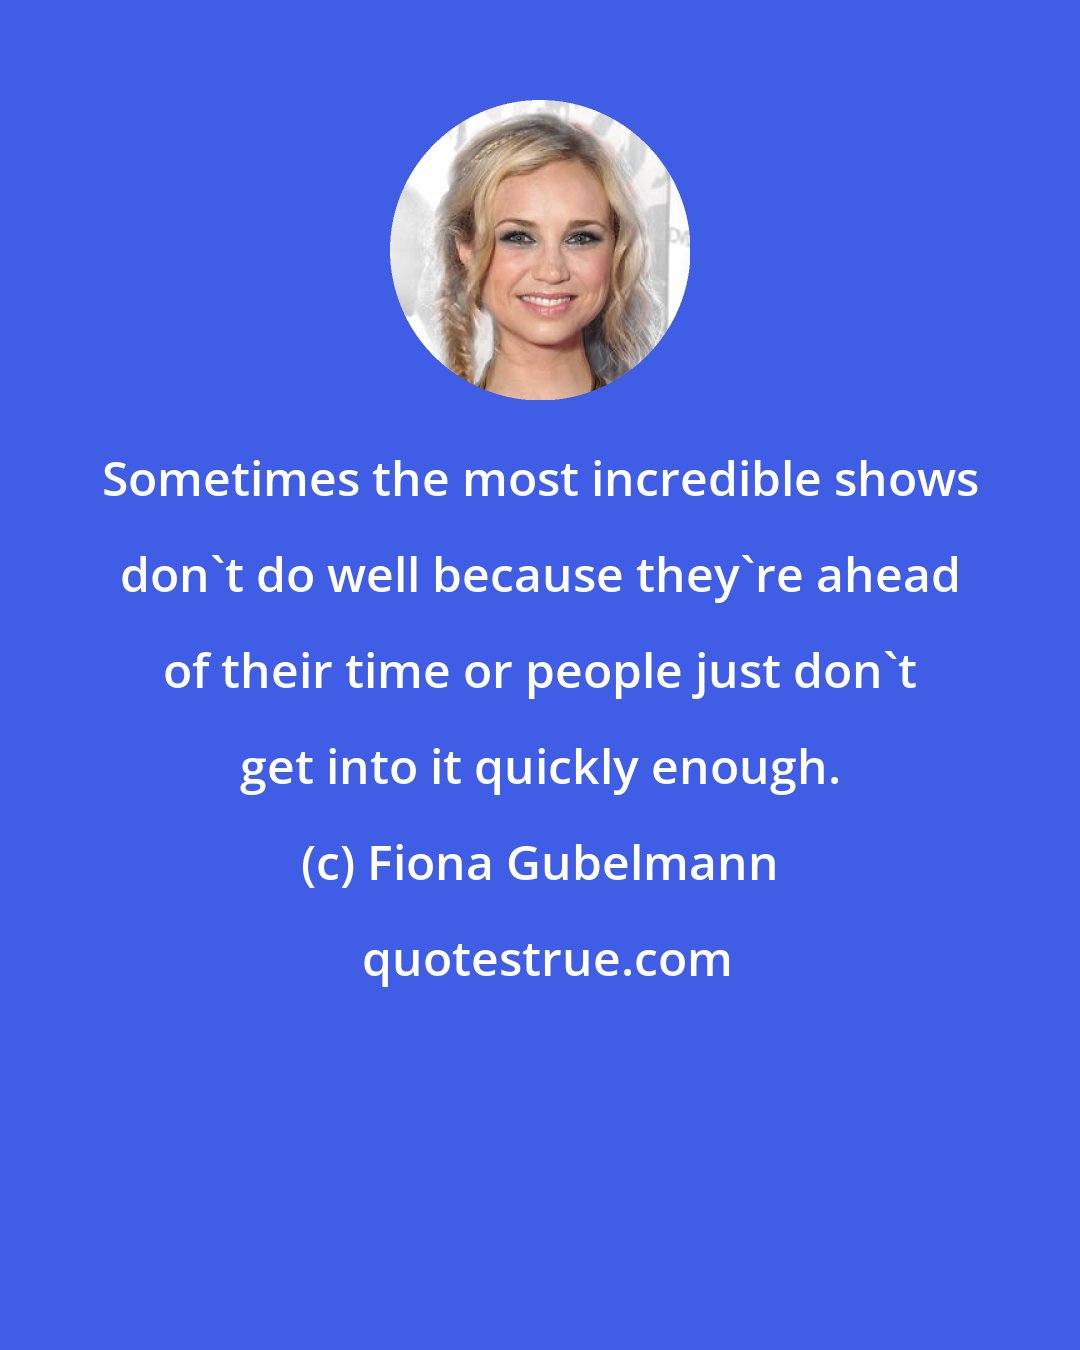 Fiona Gubelmann: Sometimes the most incredible shows don't do well because they're ahead of their time or people just don't get into it quickly enough.